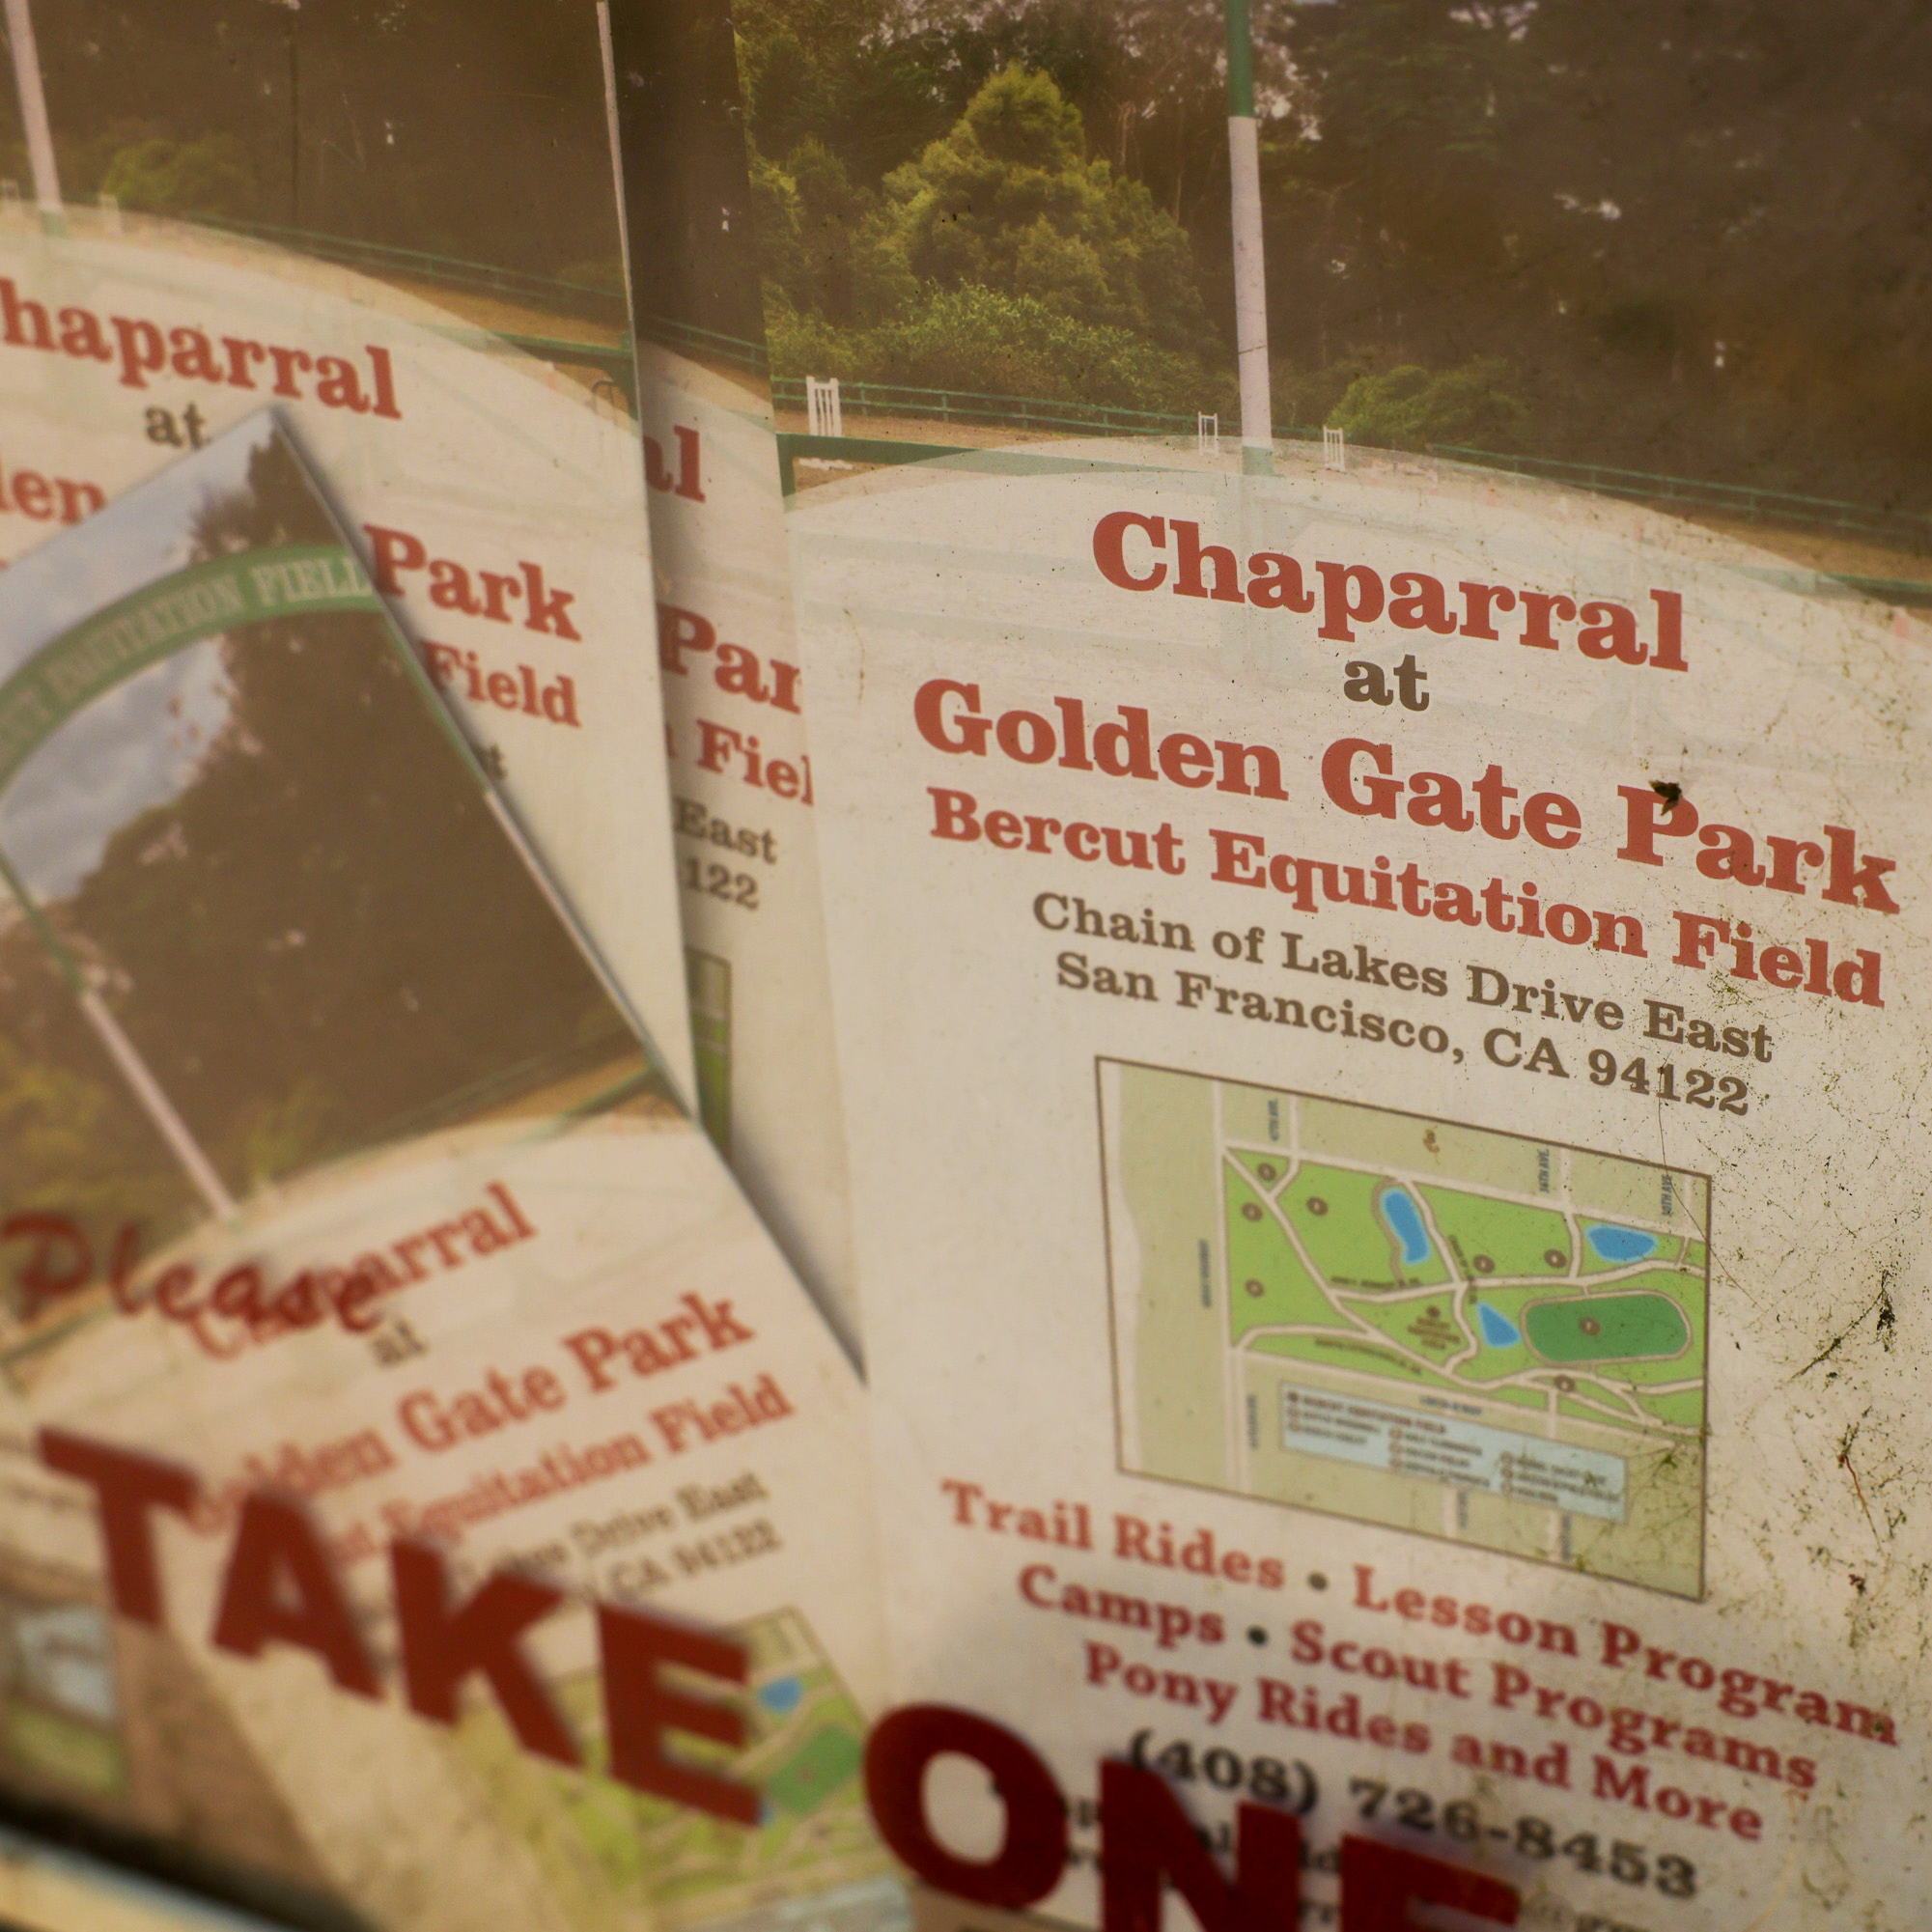 The image shows a worn poster with a map and text advertising &quot;Chaparral at Golden Gate Park&quot; in San Francisco, featuring trail rides and camps.